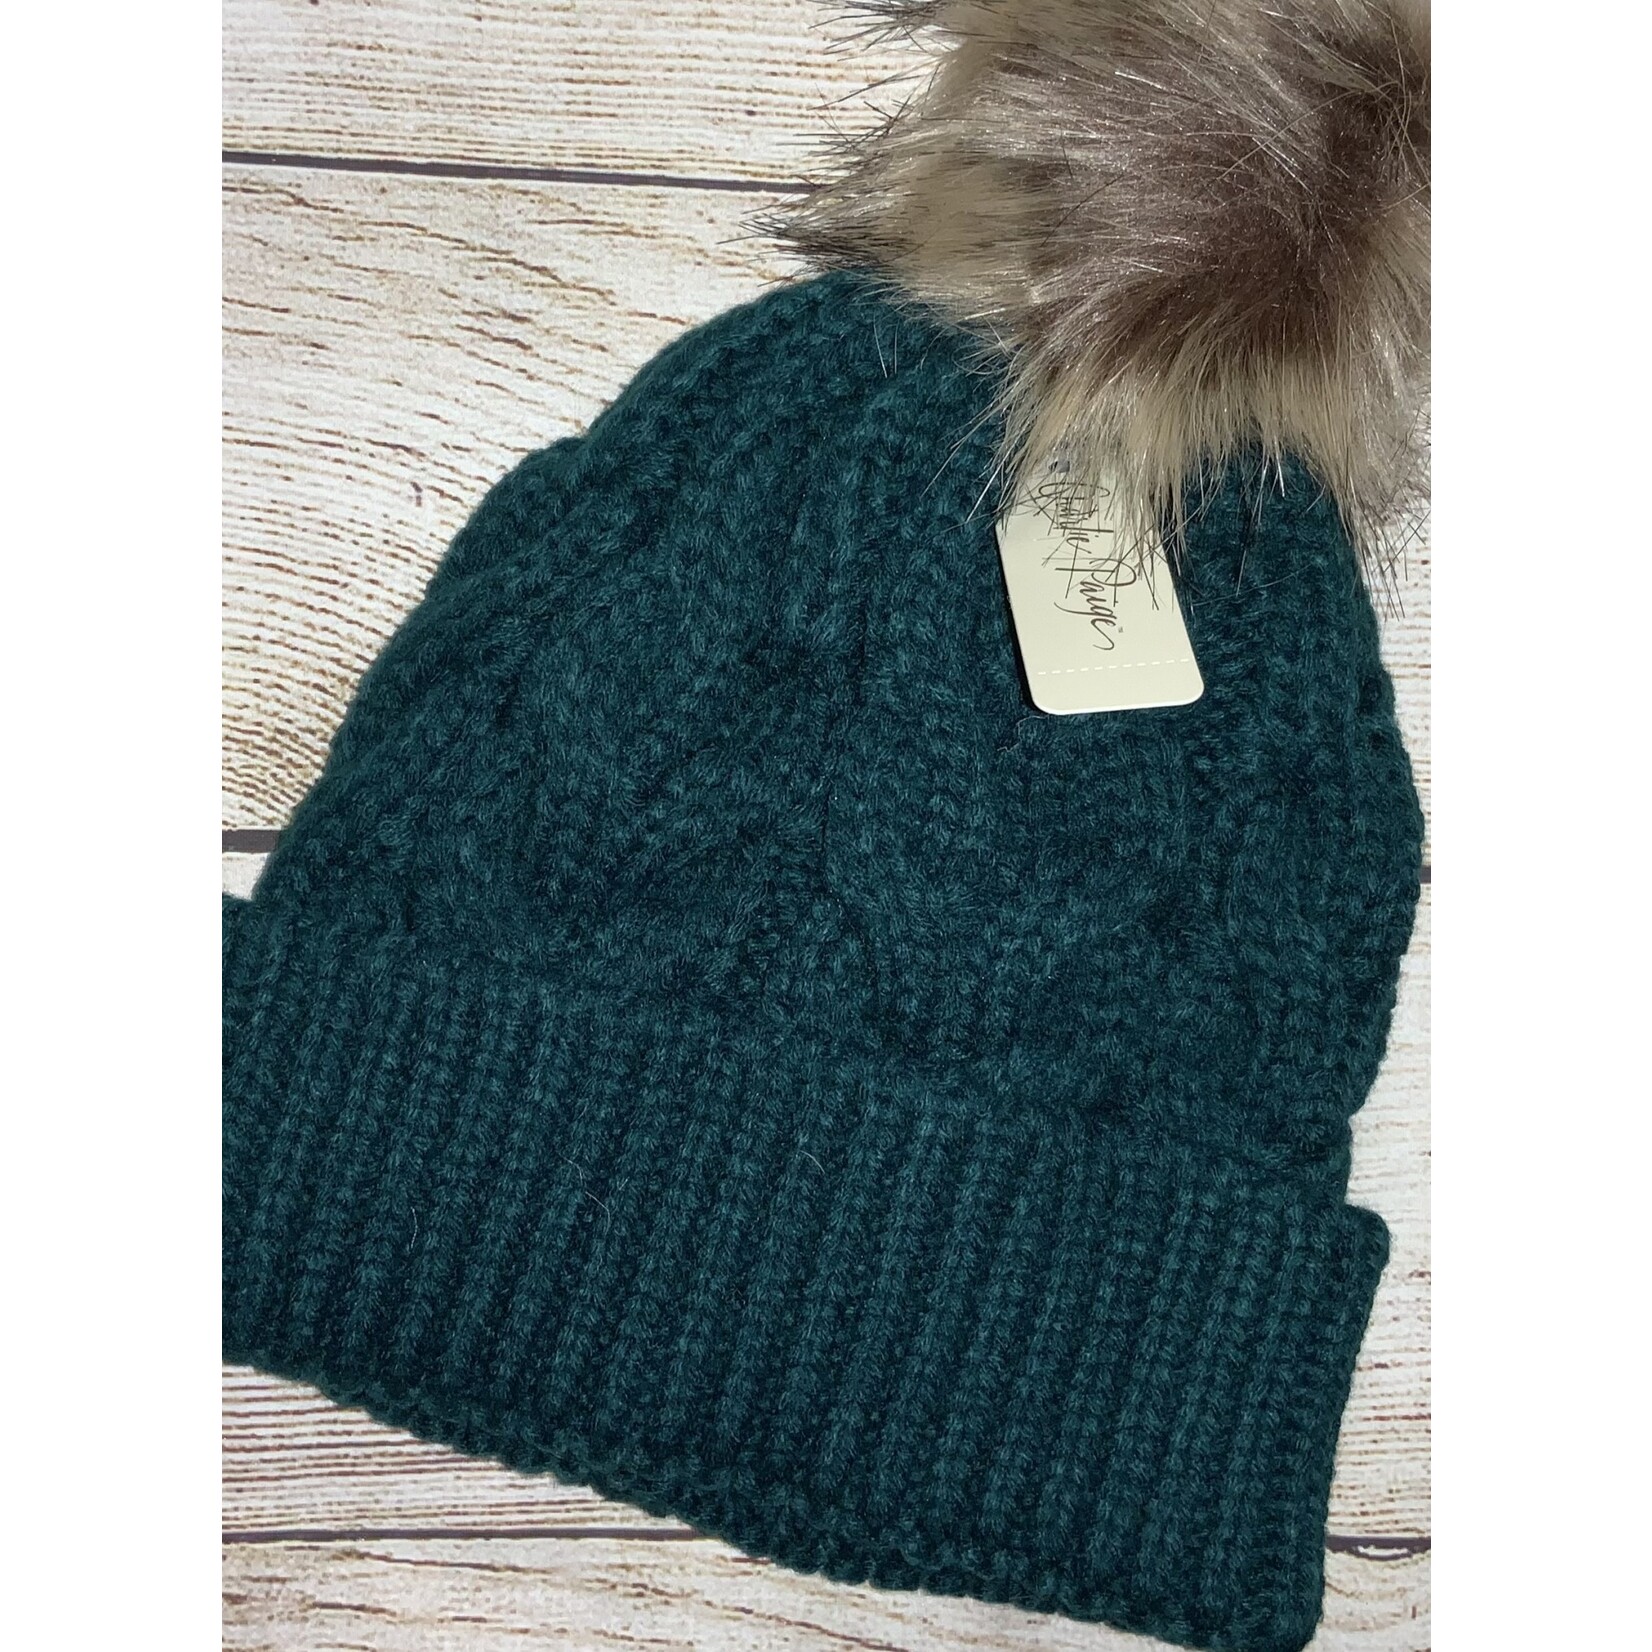 Giftcraft Charlie Paige Green Cable Knit Pom Hat